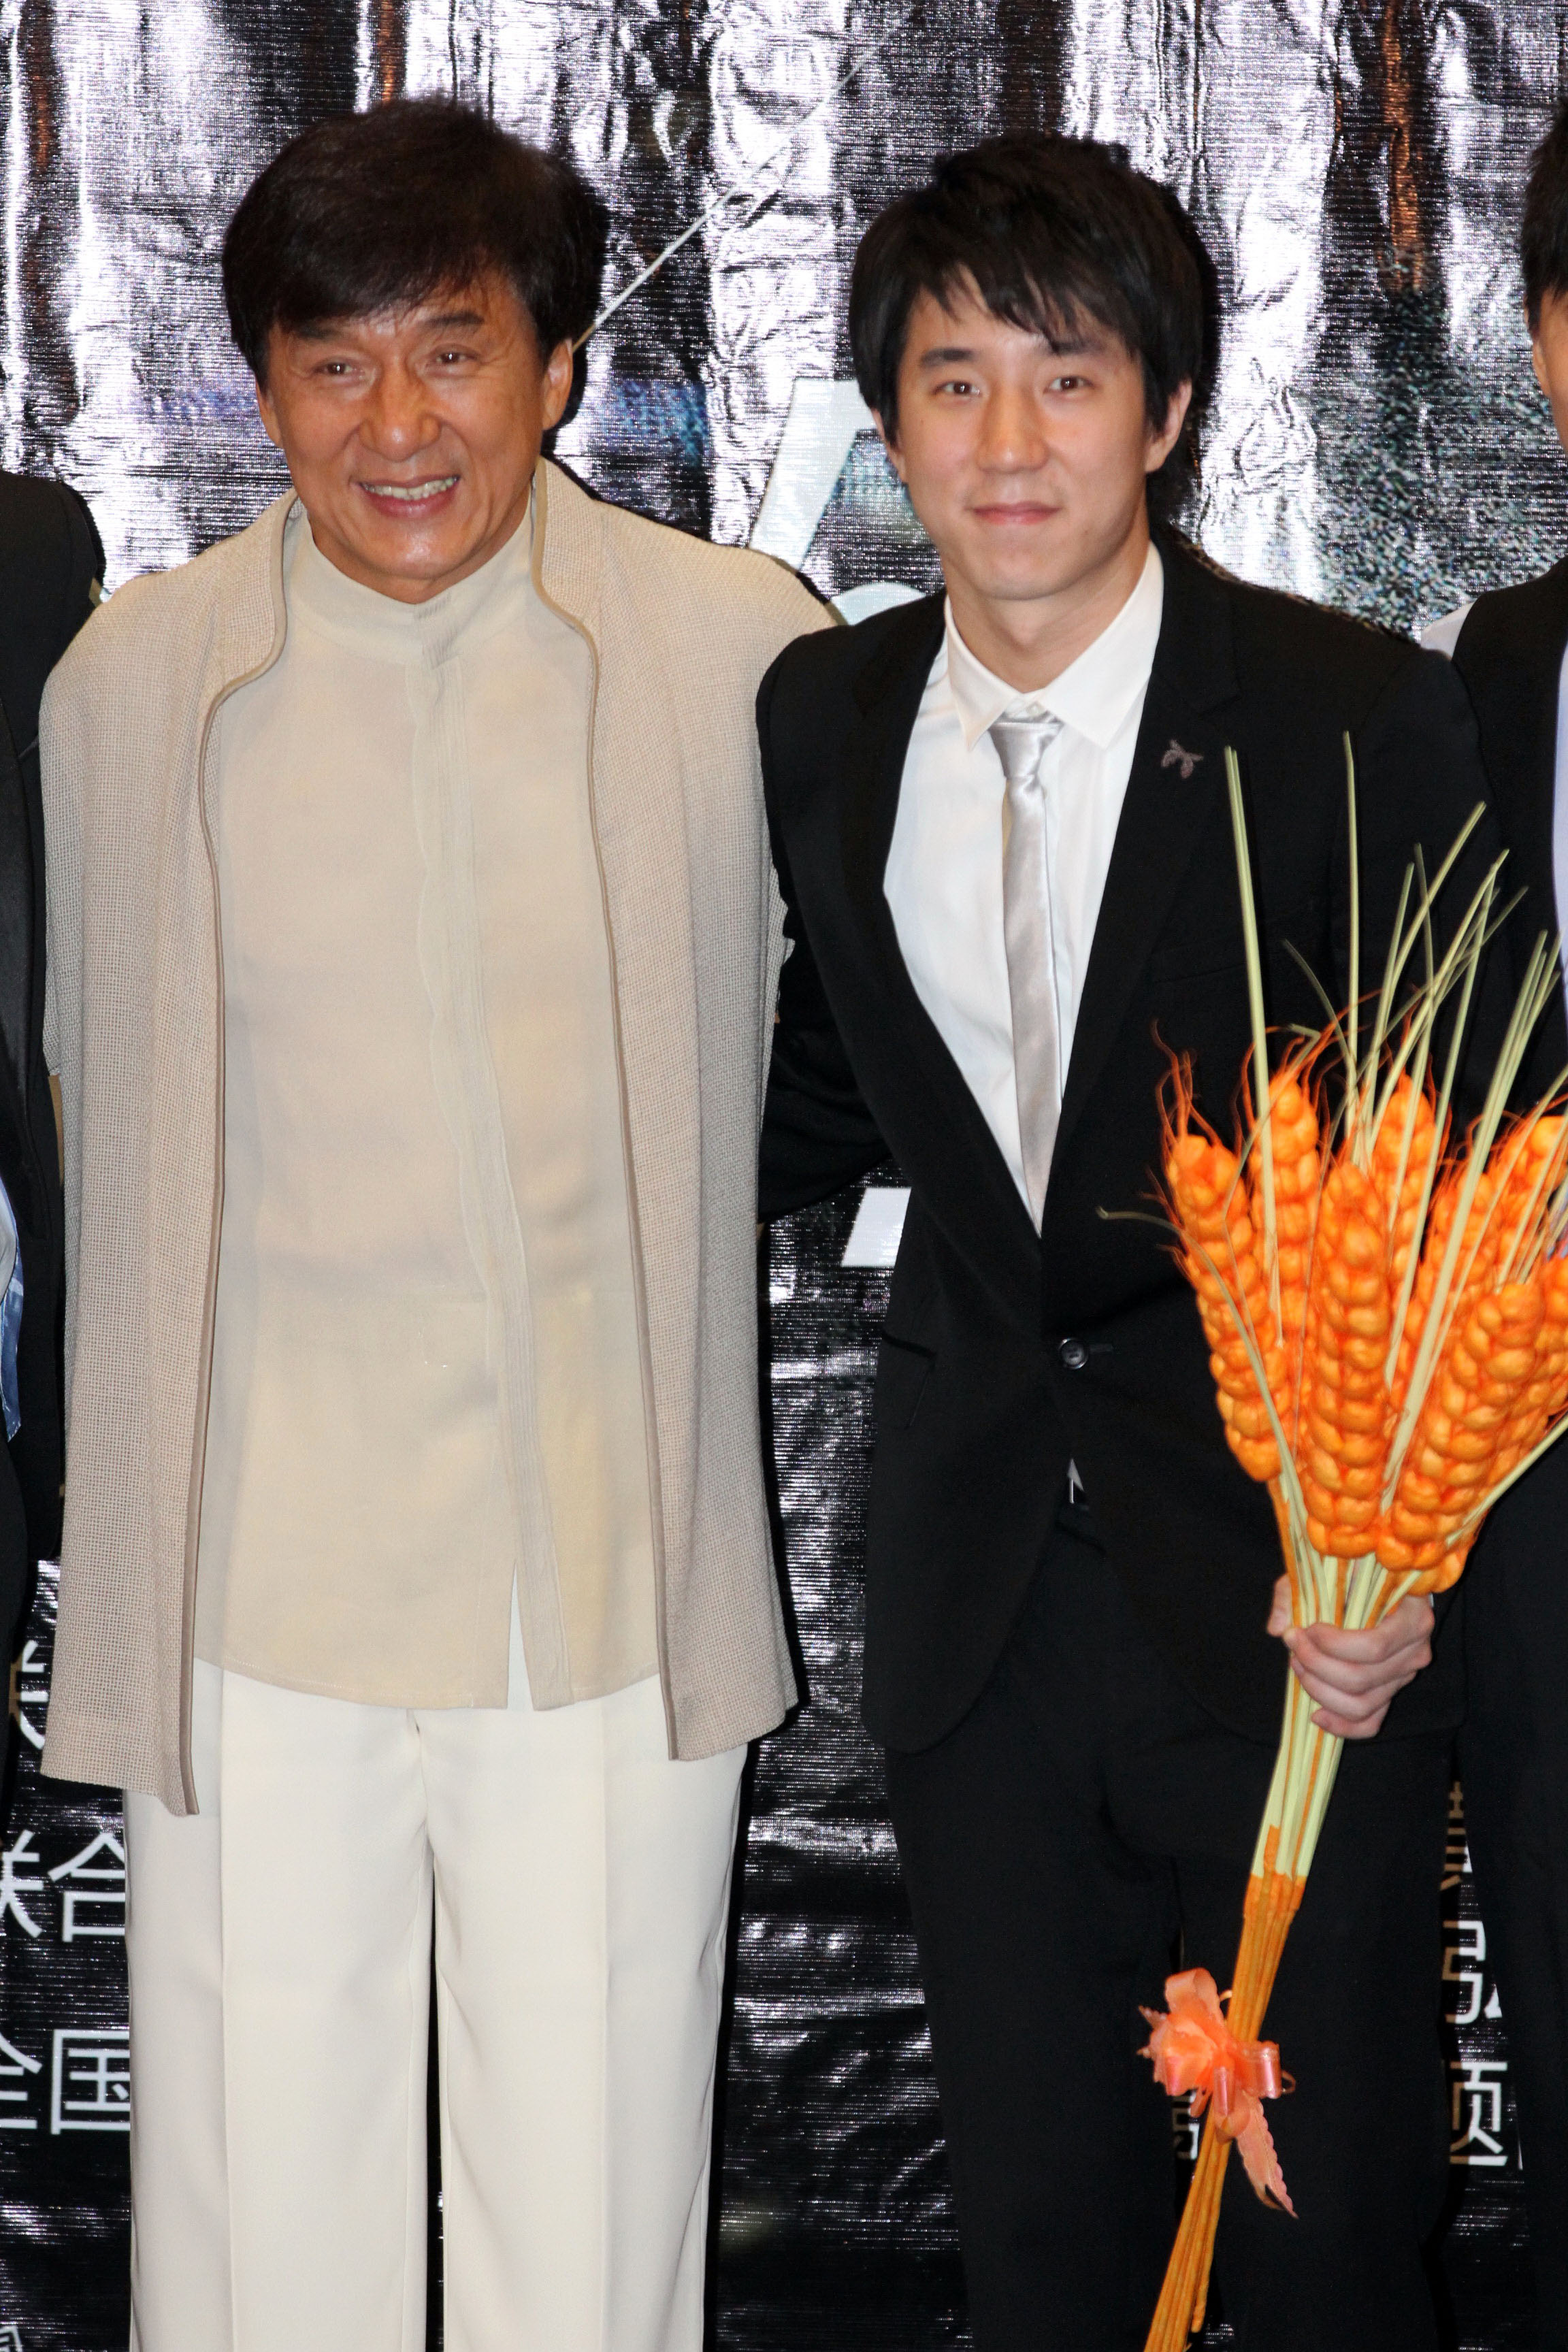 Actor Jackie Chan and his actor-singer son Jaycee Chan attend "Double Trouble" premiere at Jackie Chan Yaolai International Cinema on June 5, 2012 in Beijing. (ChinaFotoPress/Getty Images)